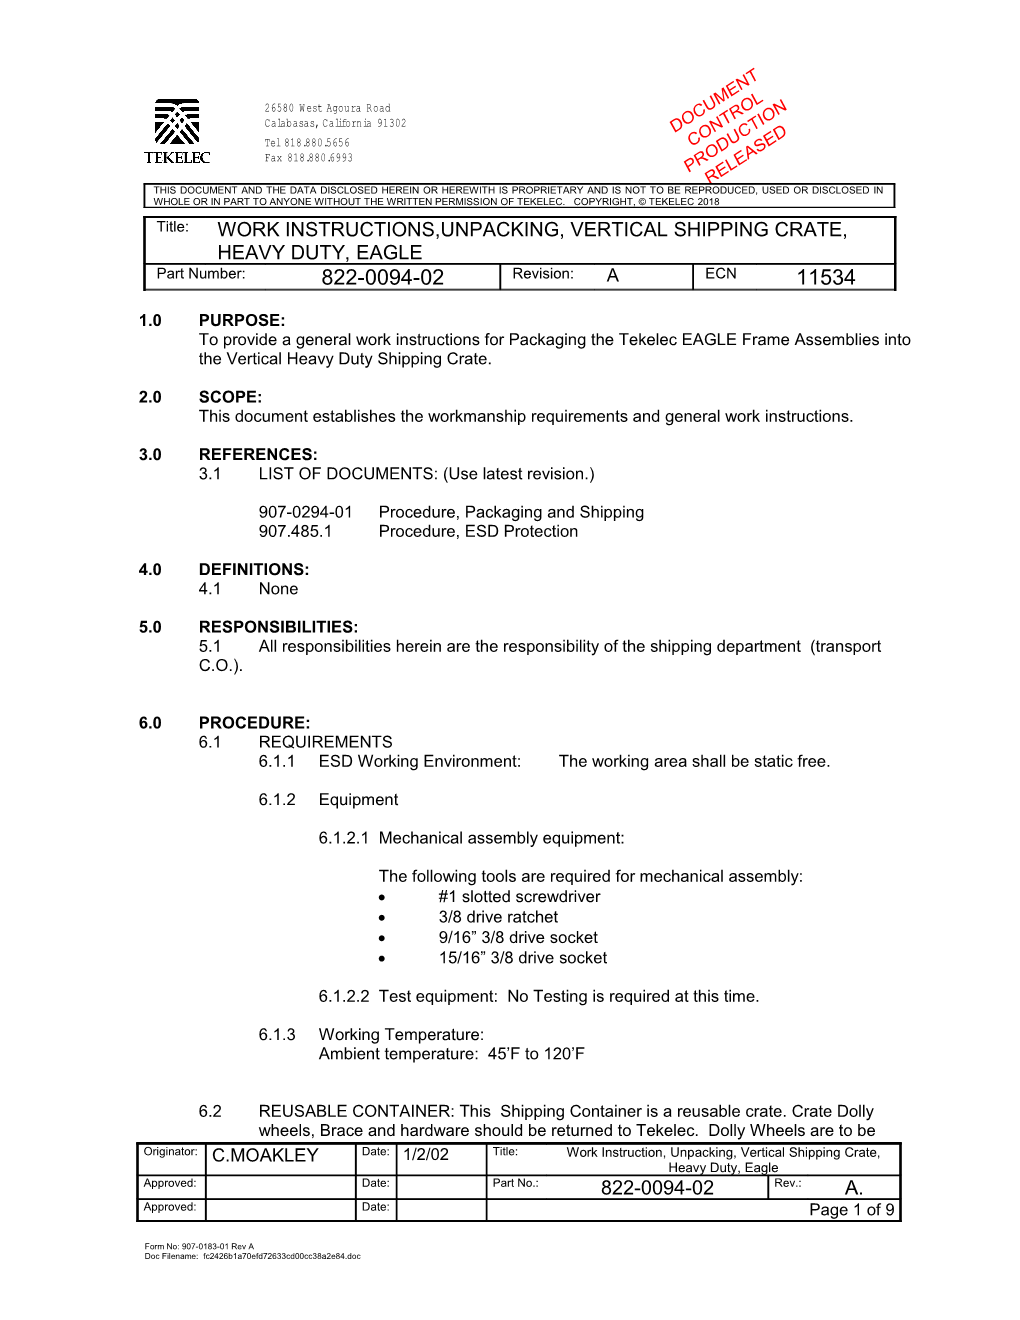 This Document Establishes the Workmanship Requirements and General Work Instructions s2